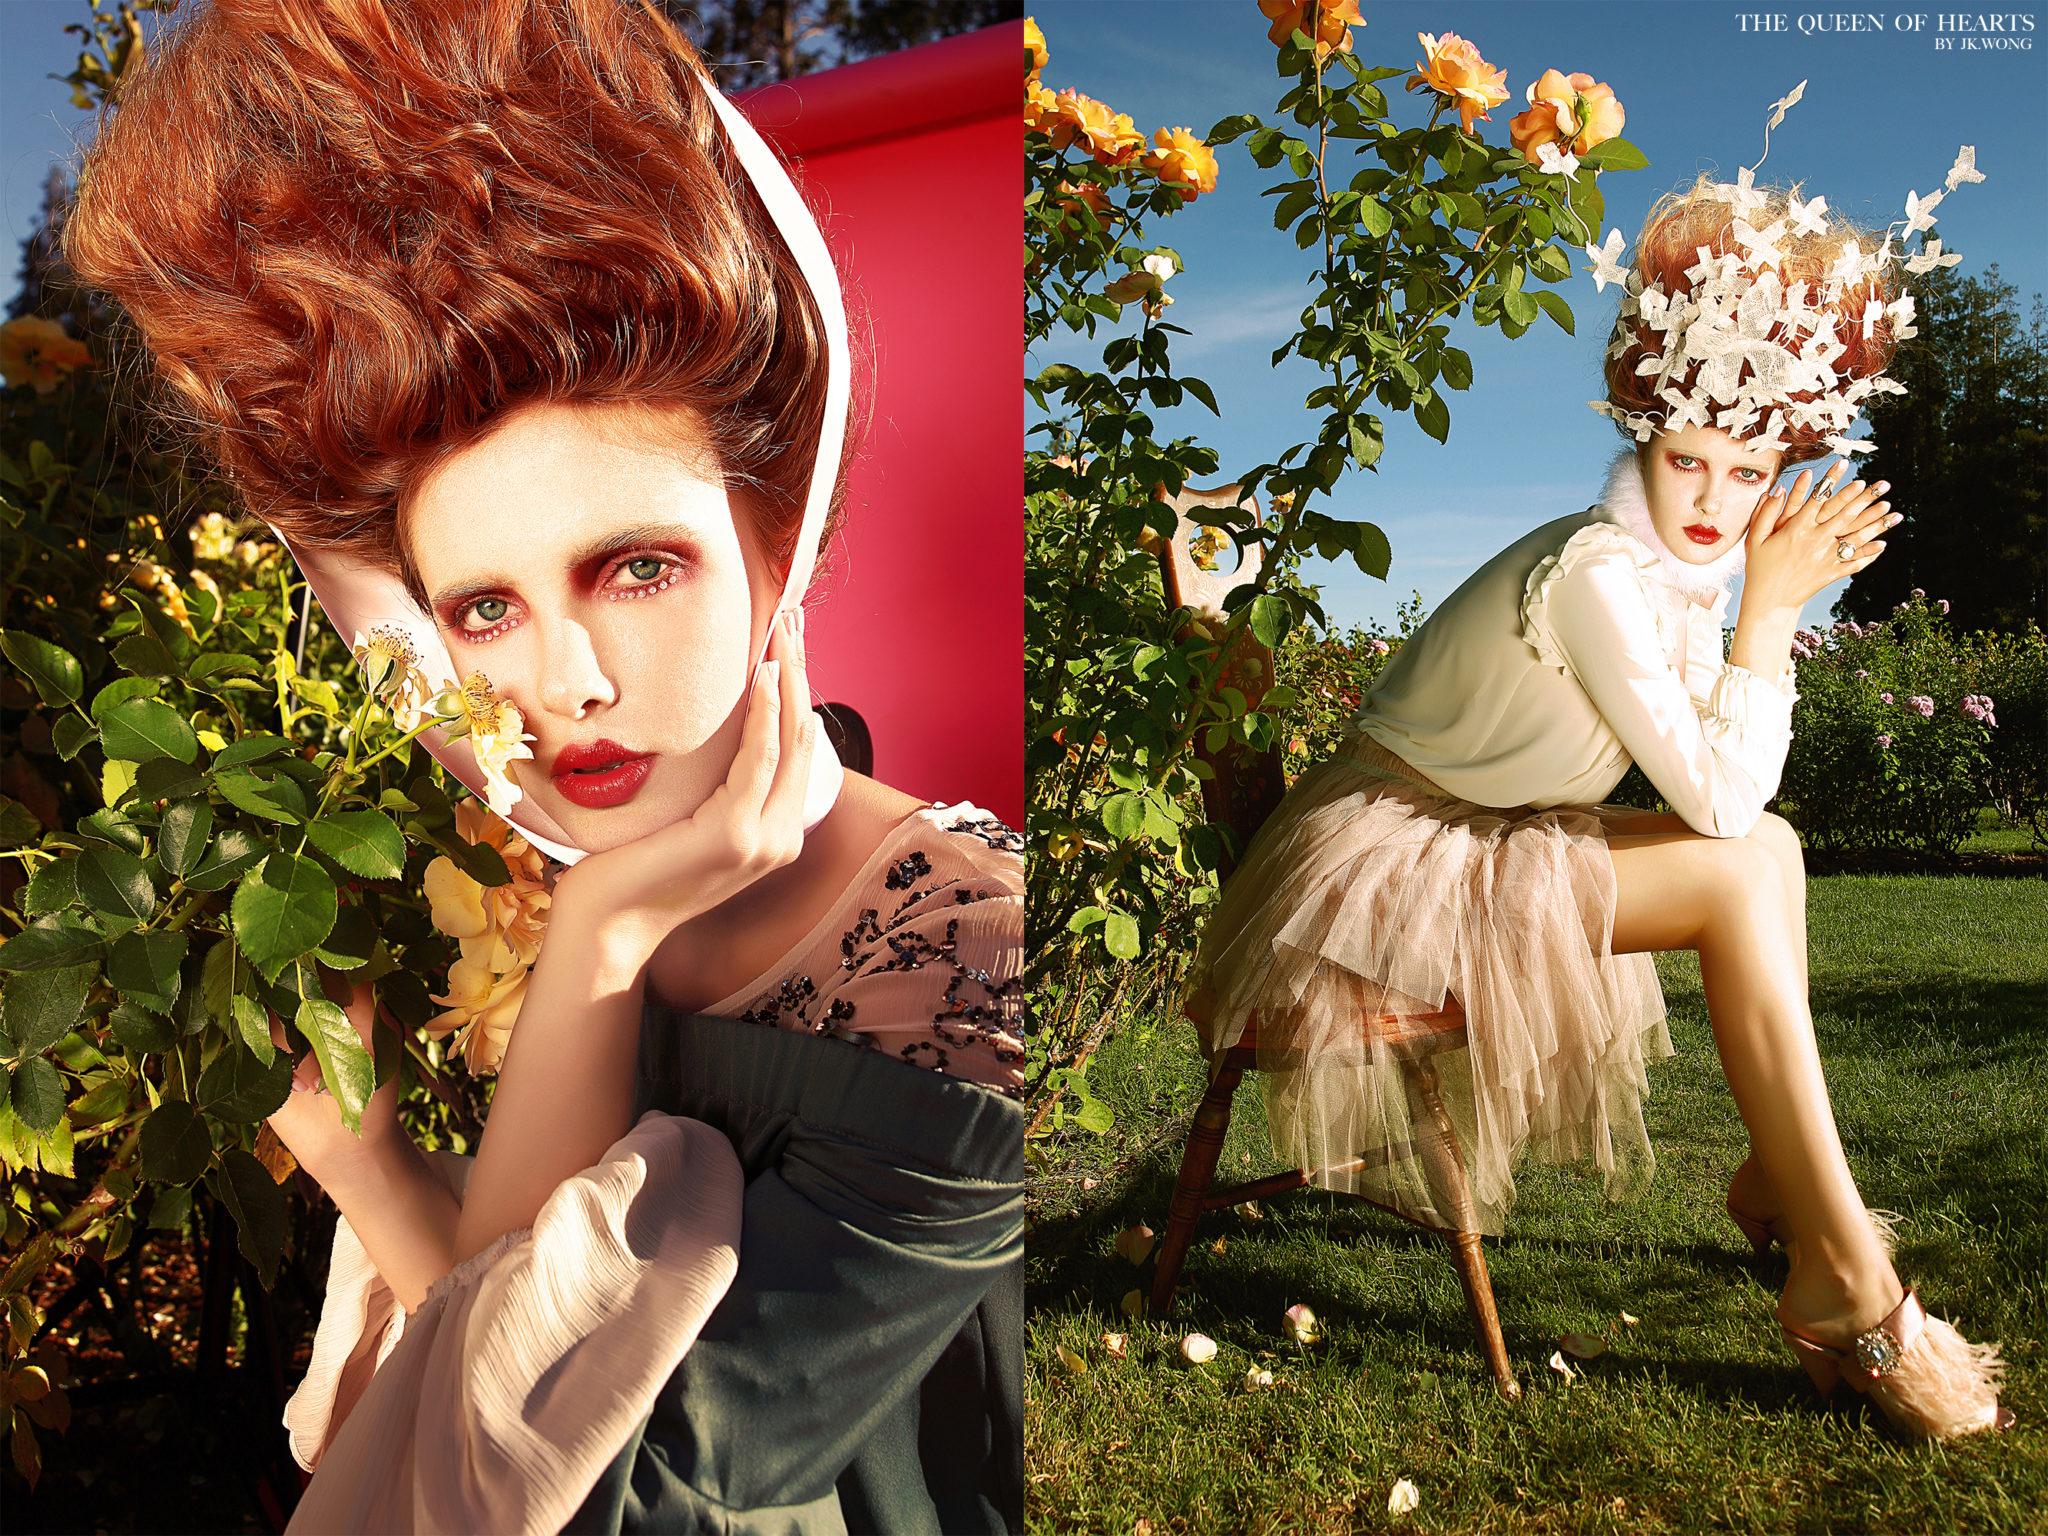 "Queen of Hearts" by JK Wong featured in Vogue Italia